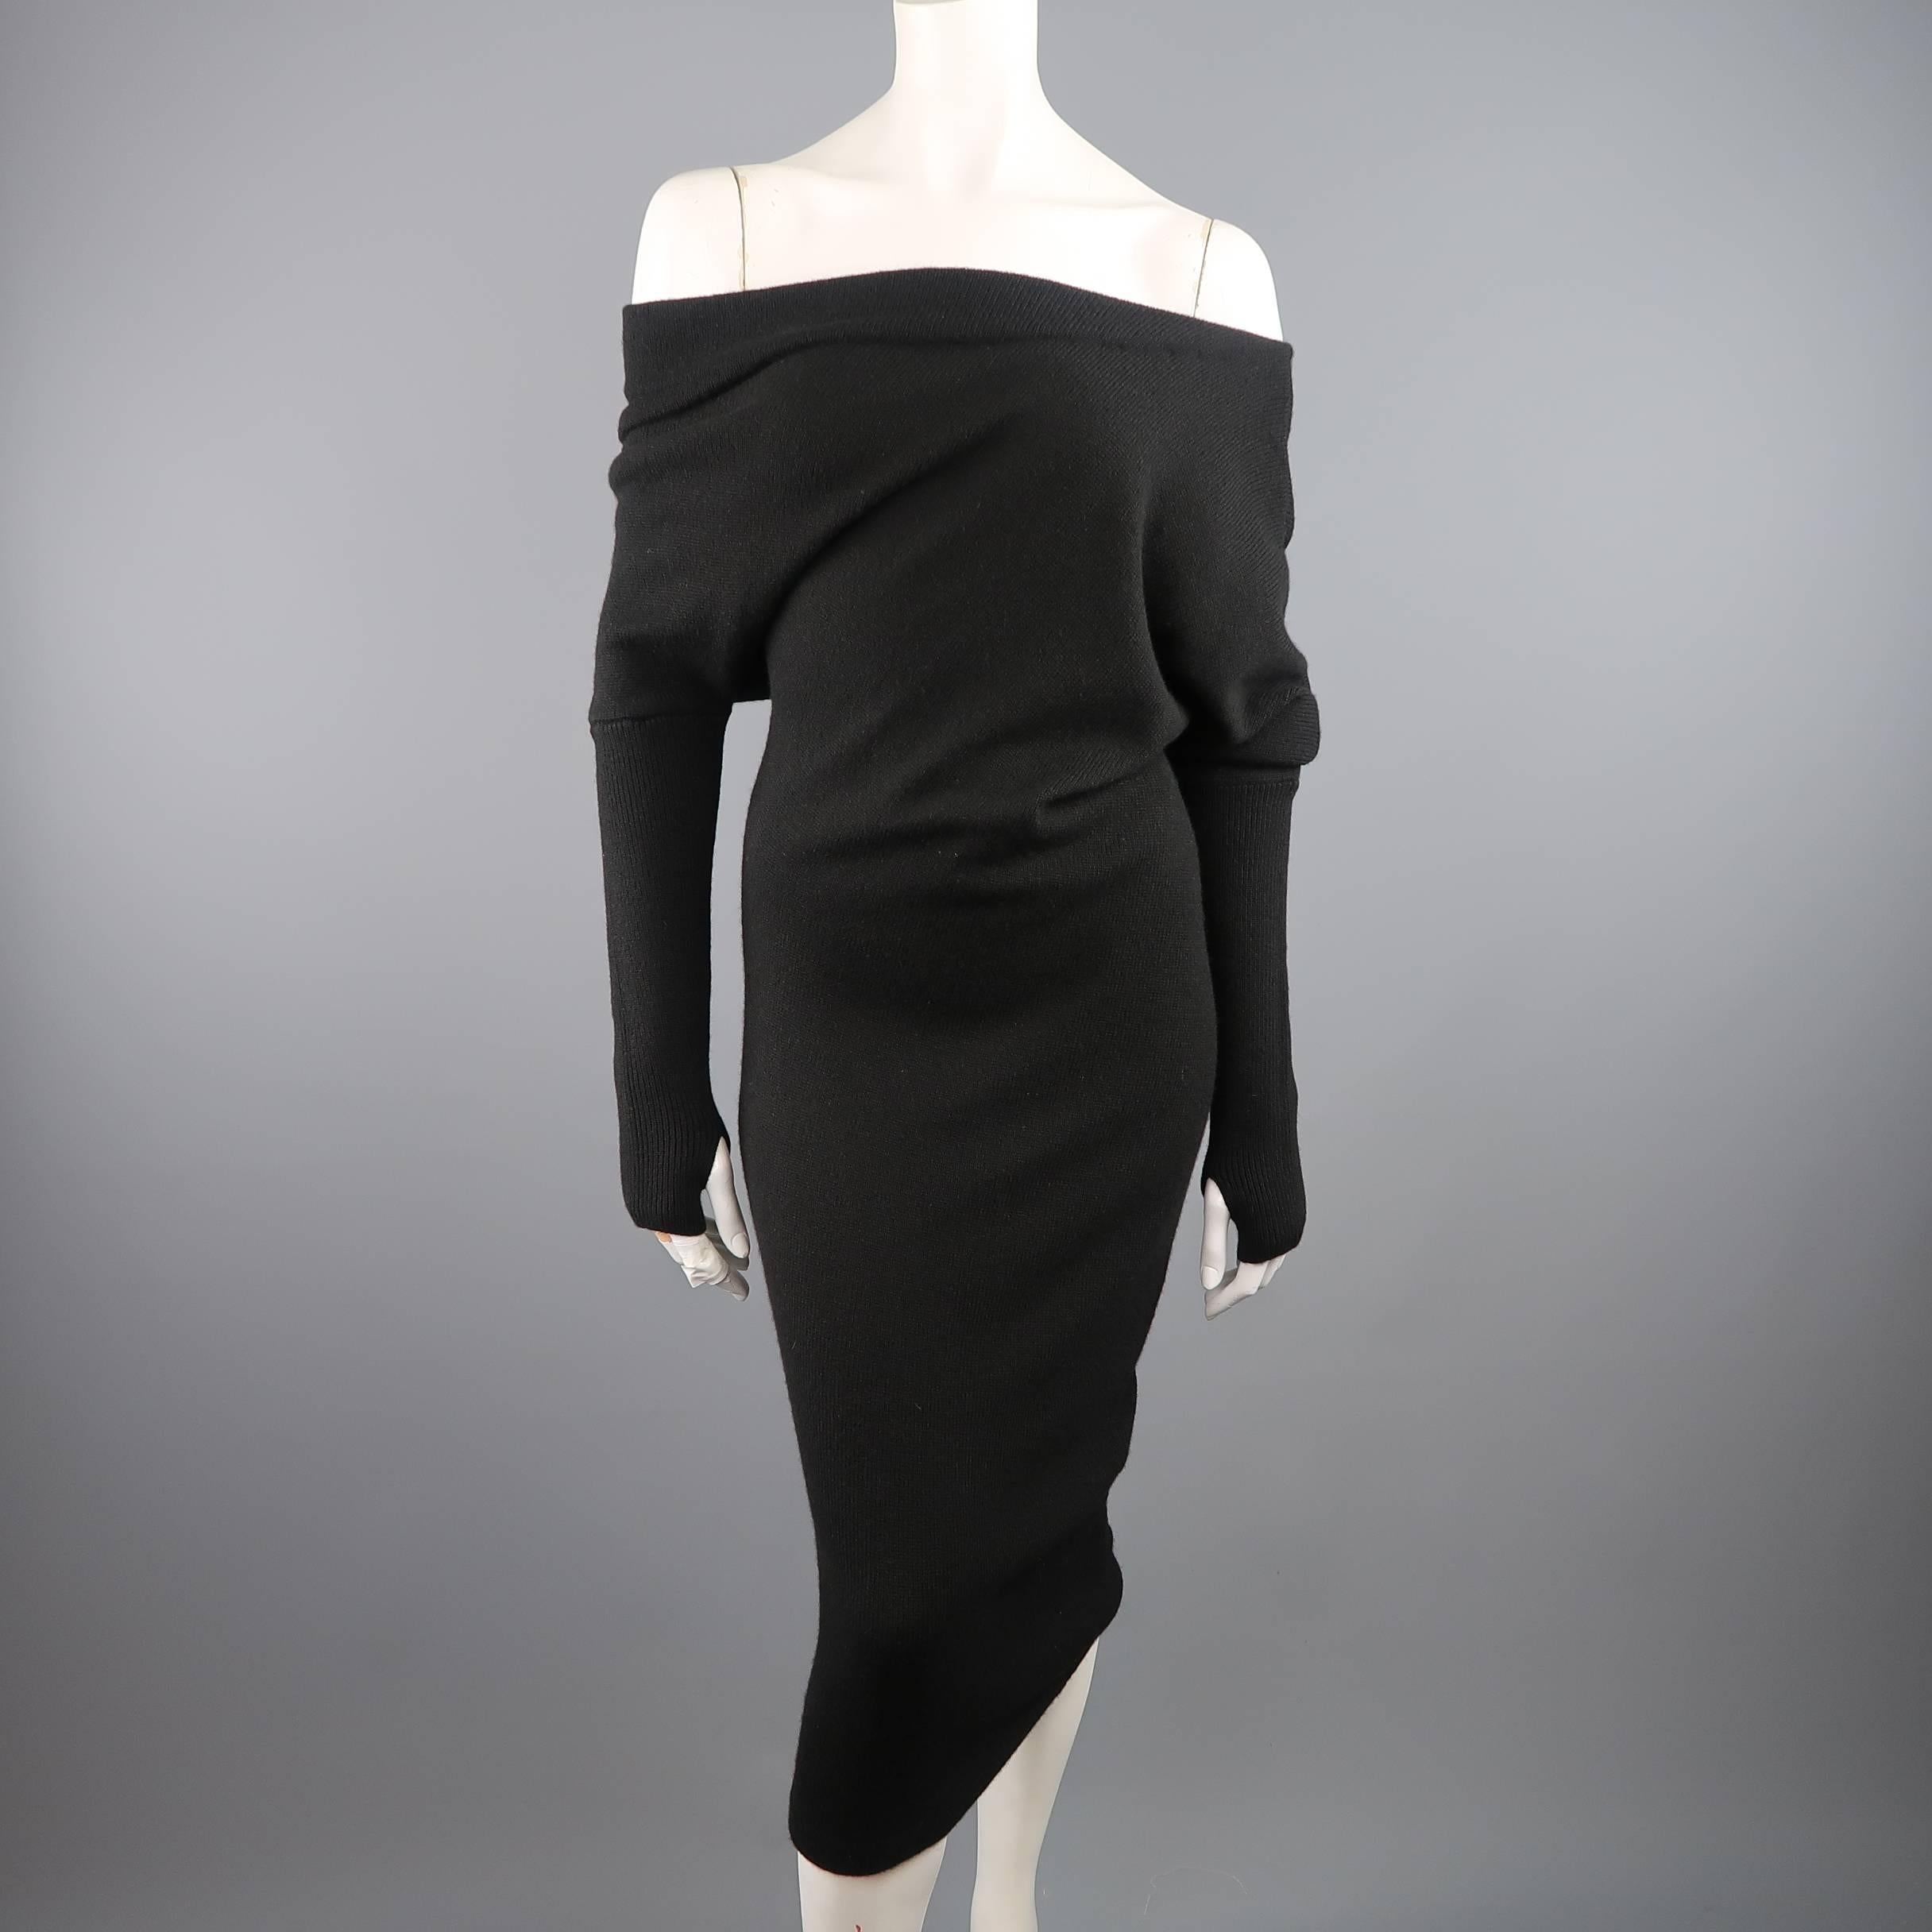 TOM FORD's fabulous sexy twist on a cozy sweater dress comes in thick black cashmere and features an asymmetrical, off one shoulder neckline, slouch draped mid section, fitted midi skirt, and long sleeves with thumb hole. Made in Italy.
 
New with